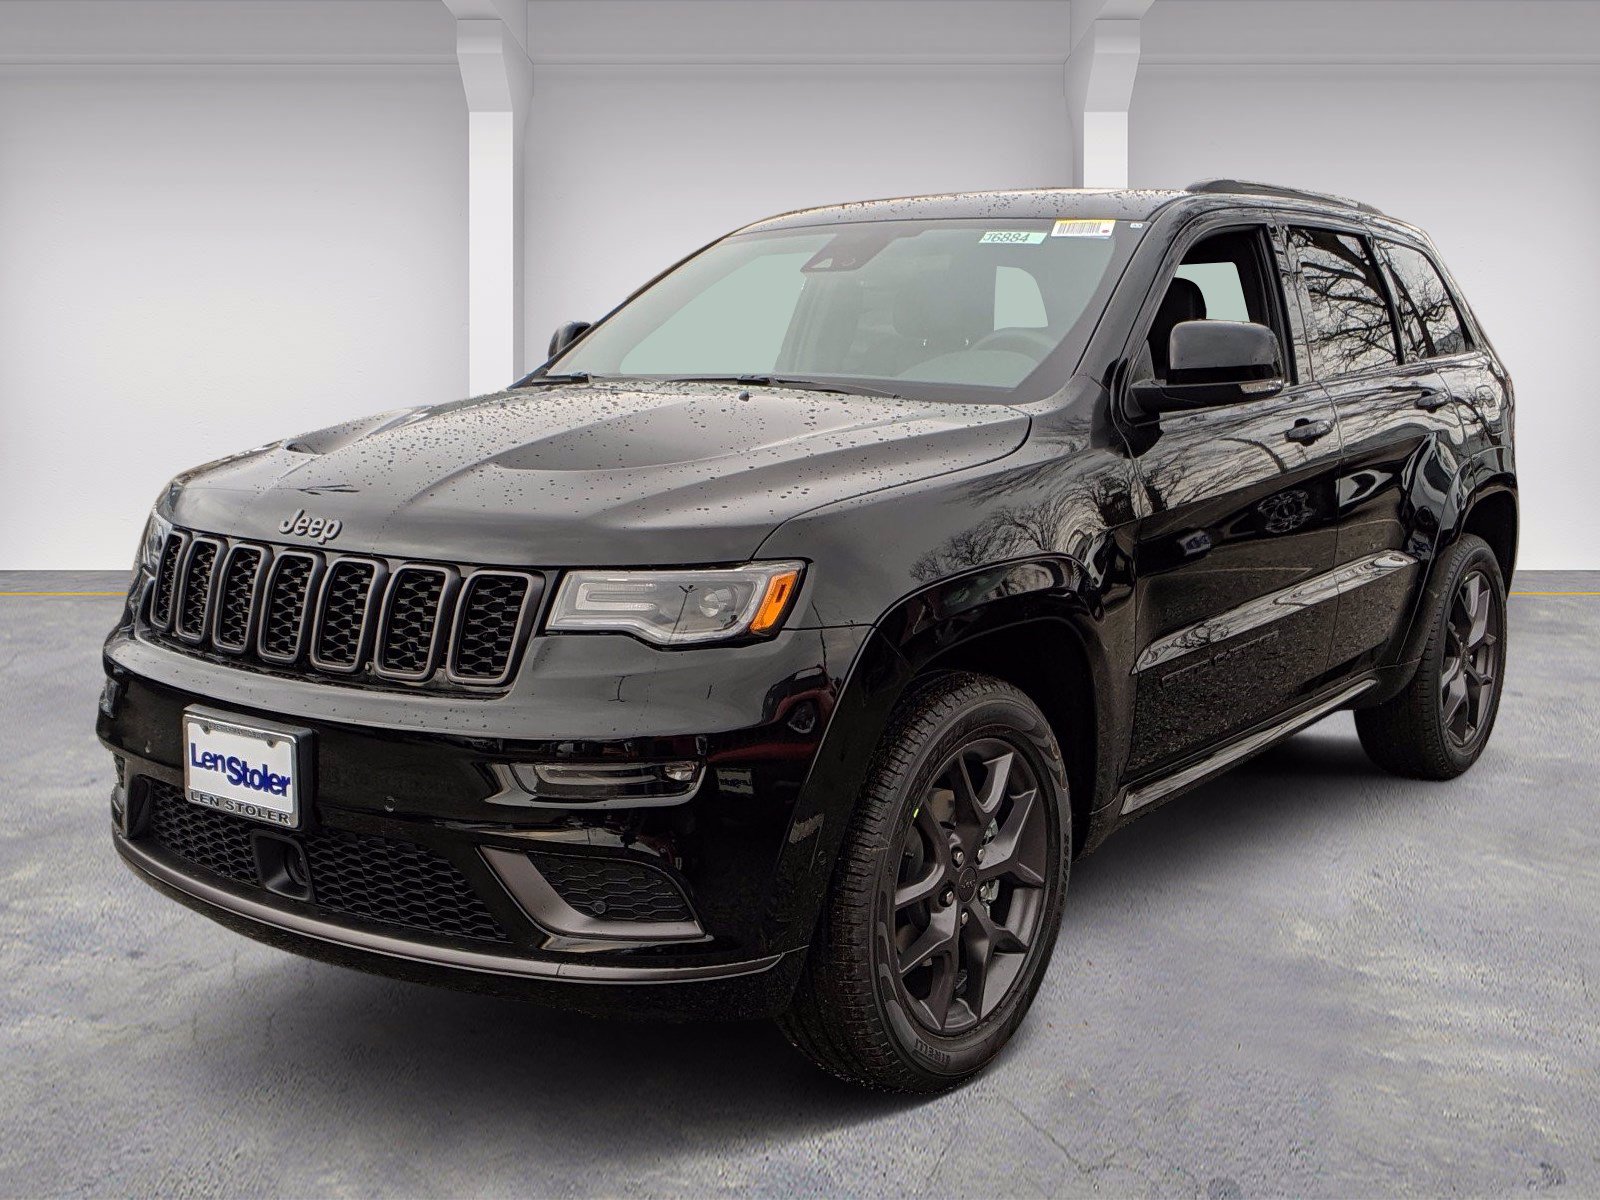 New 2020 JEEP Grand Cherokee Limited X 4 215 4 Sport Utility